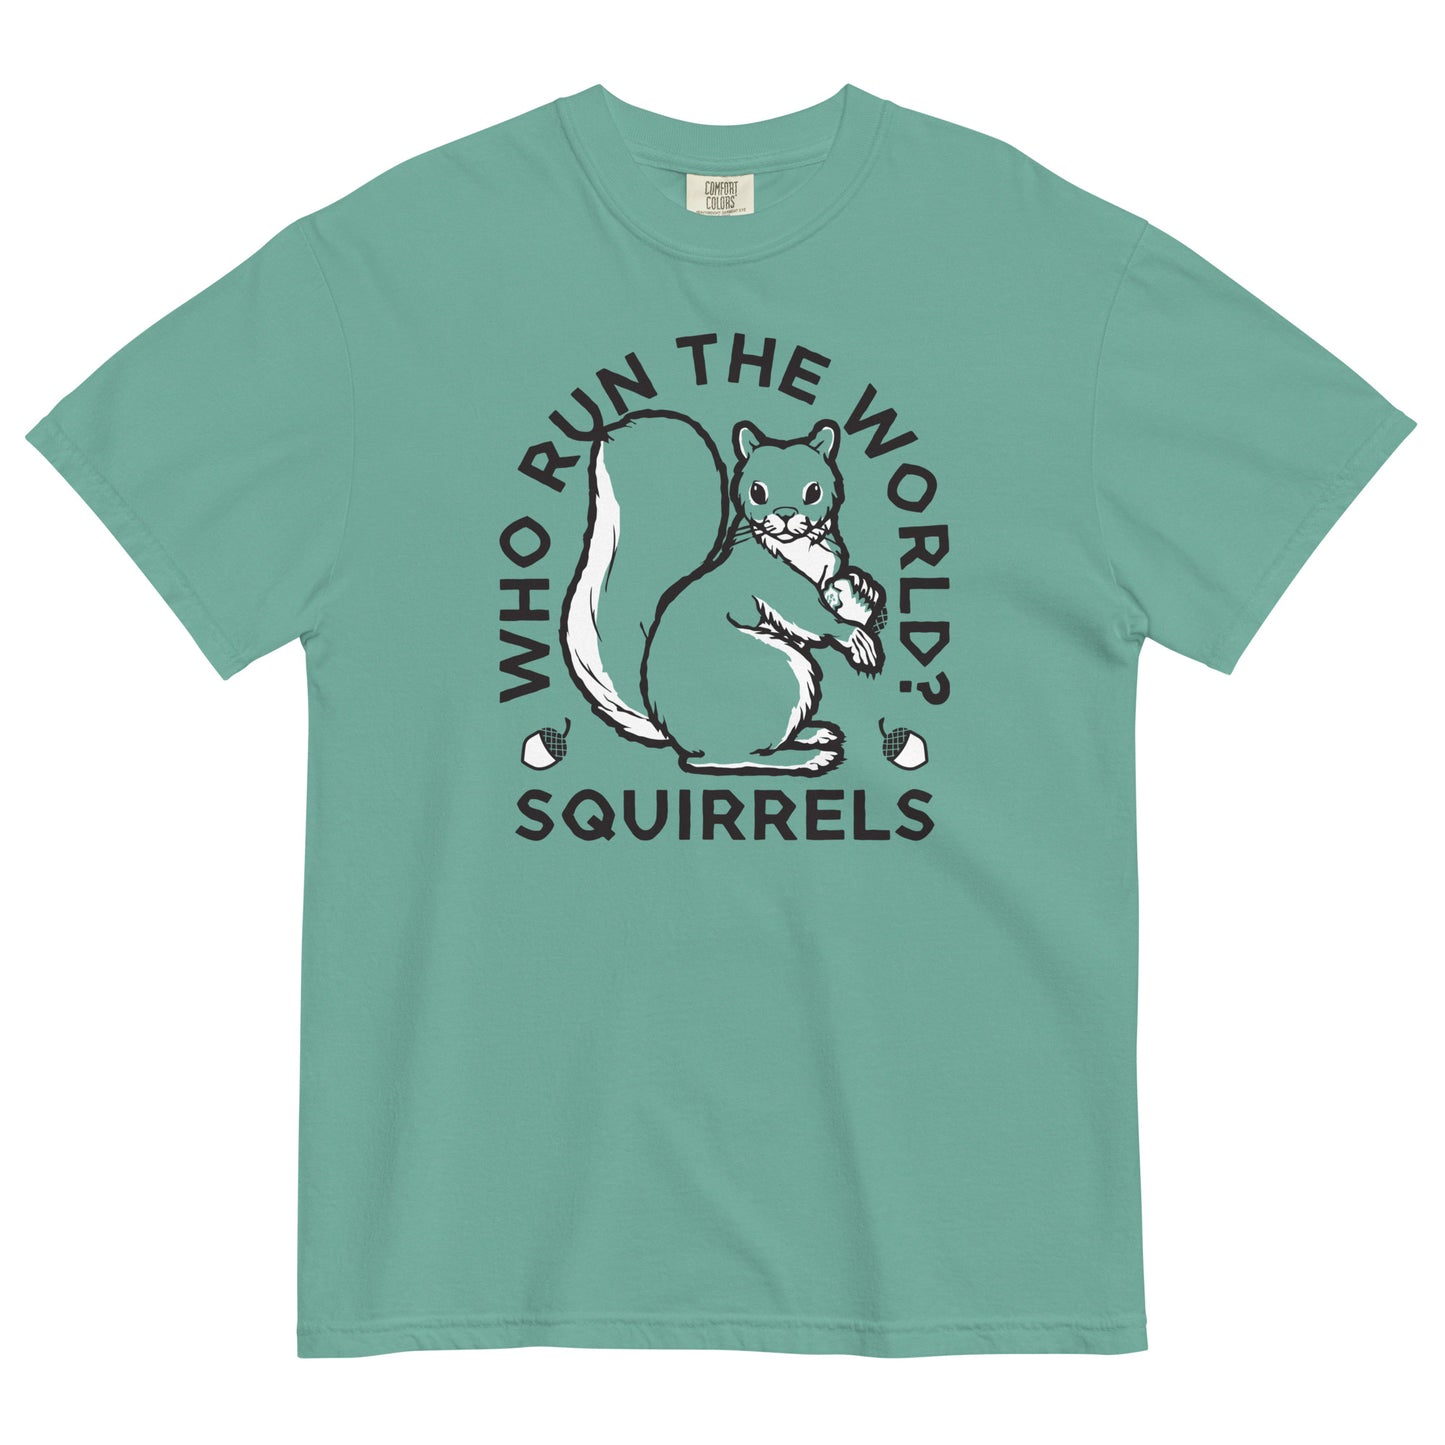 Who Run The World? Squirrels Men's Relaxed Fit Tee